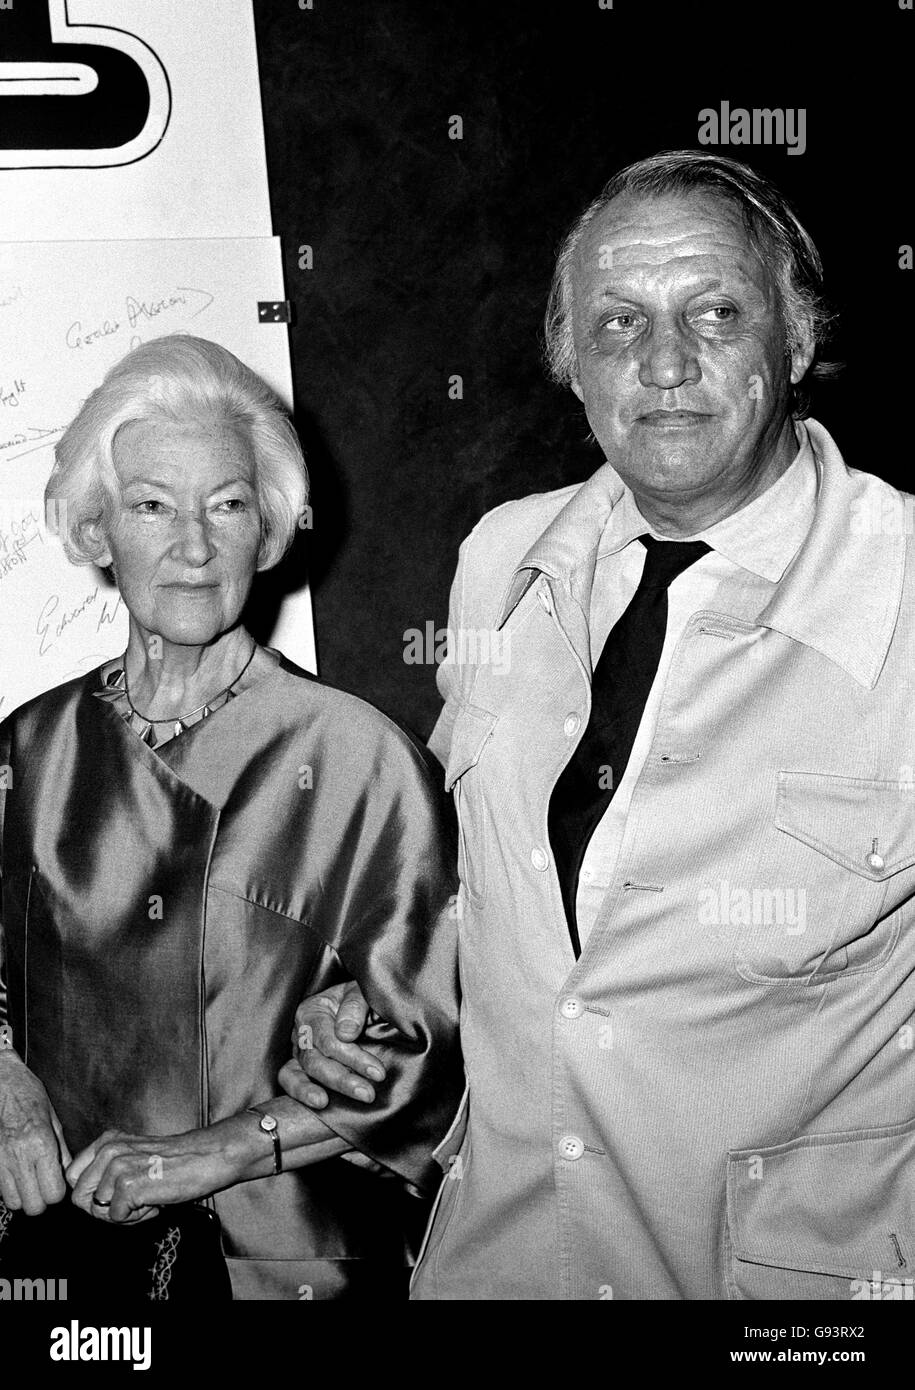 Cinema City Exhibition - Round House, Chalk Farm. Film critic Dilys Powell and director Joeseph Losey. Stock Photo